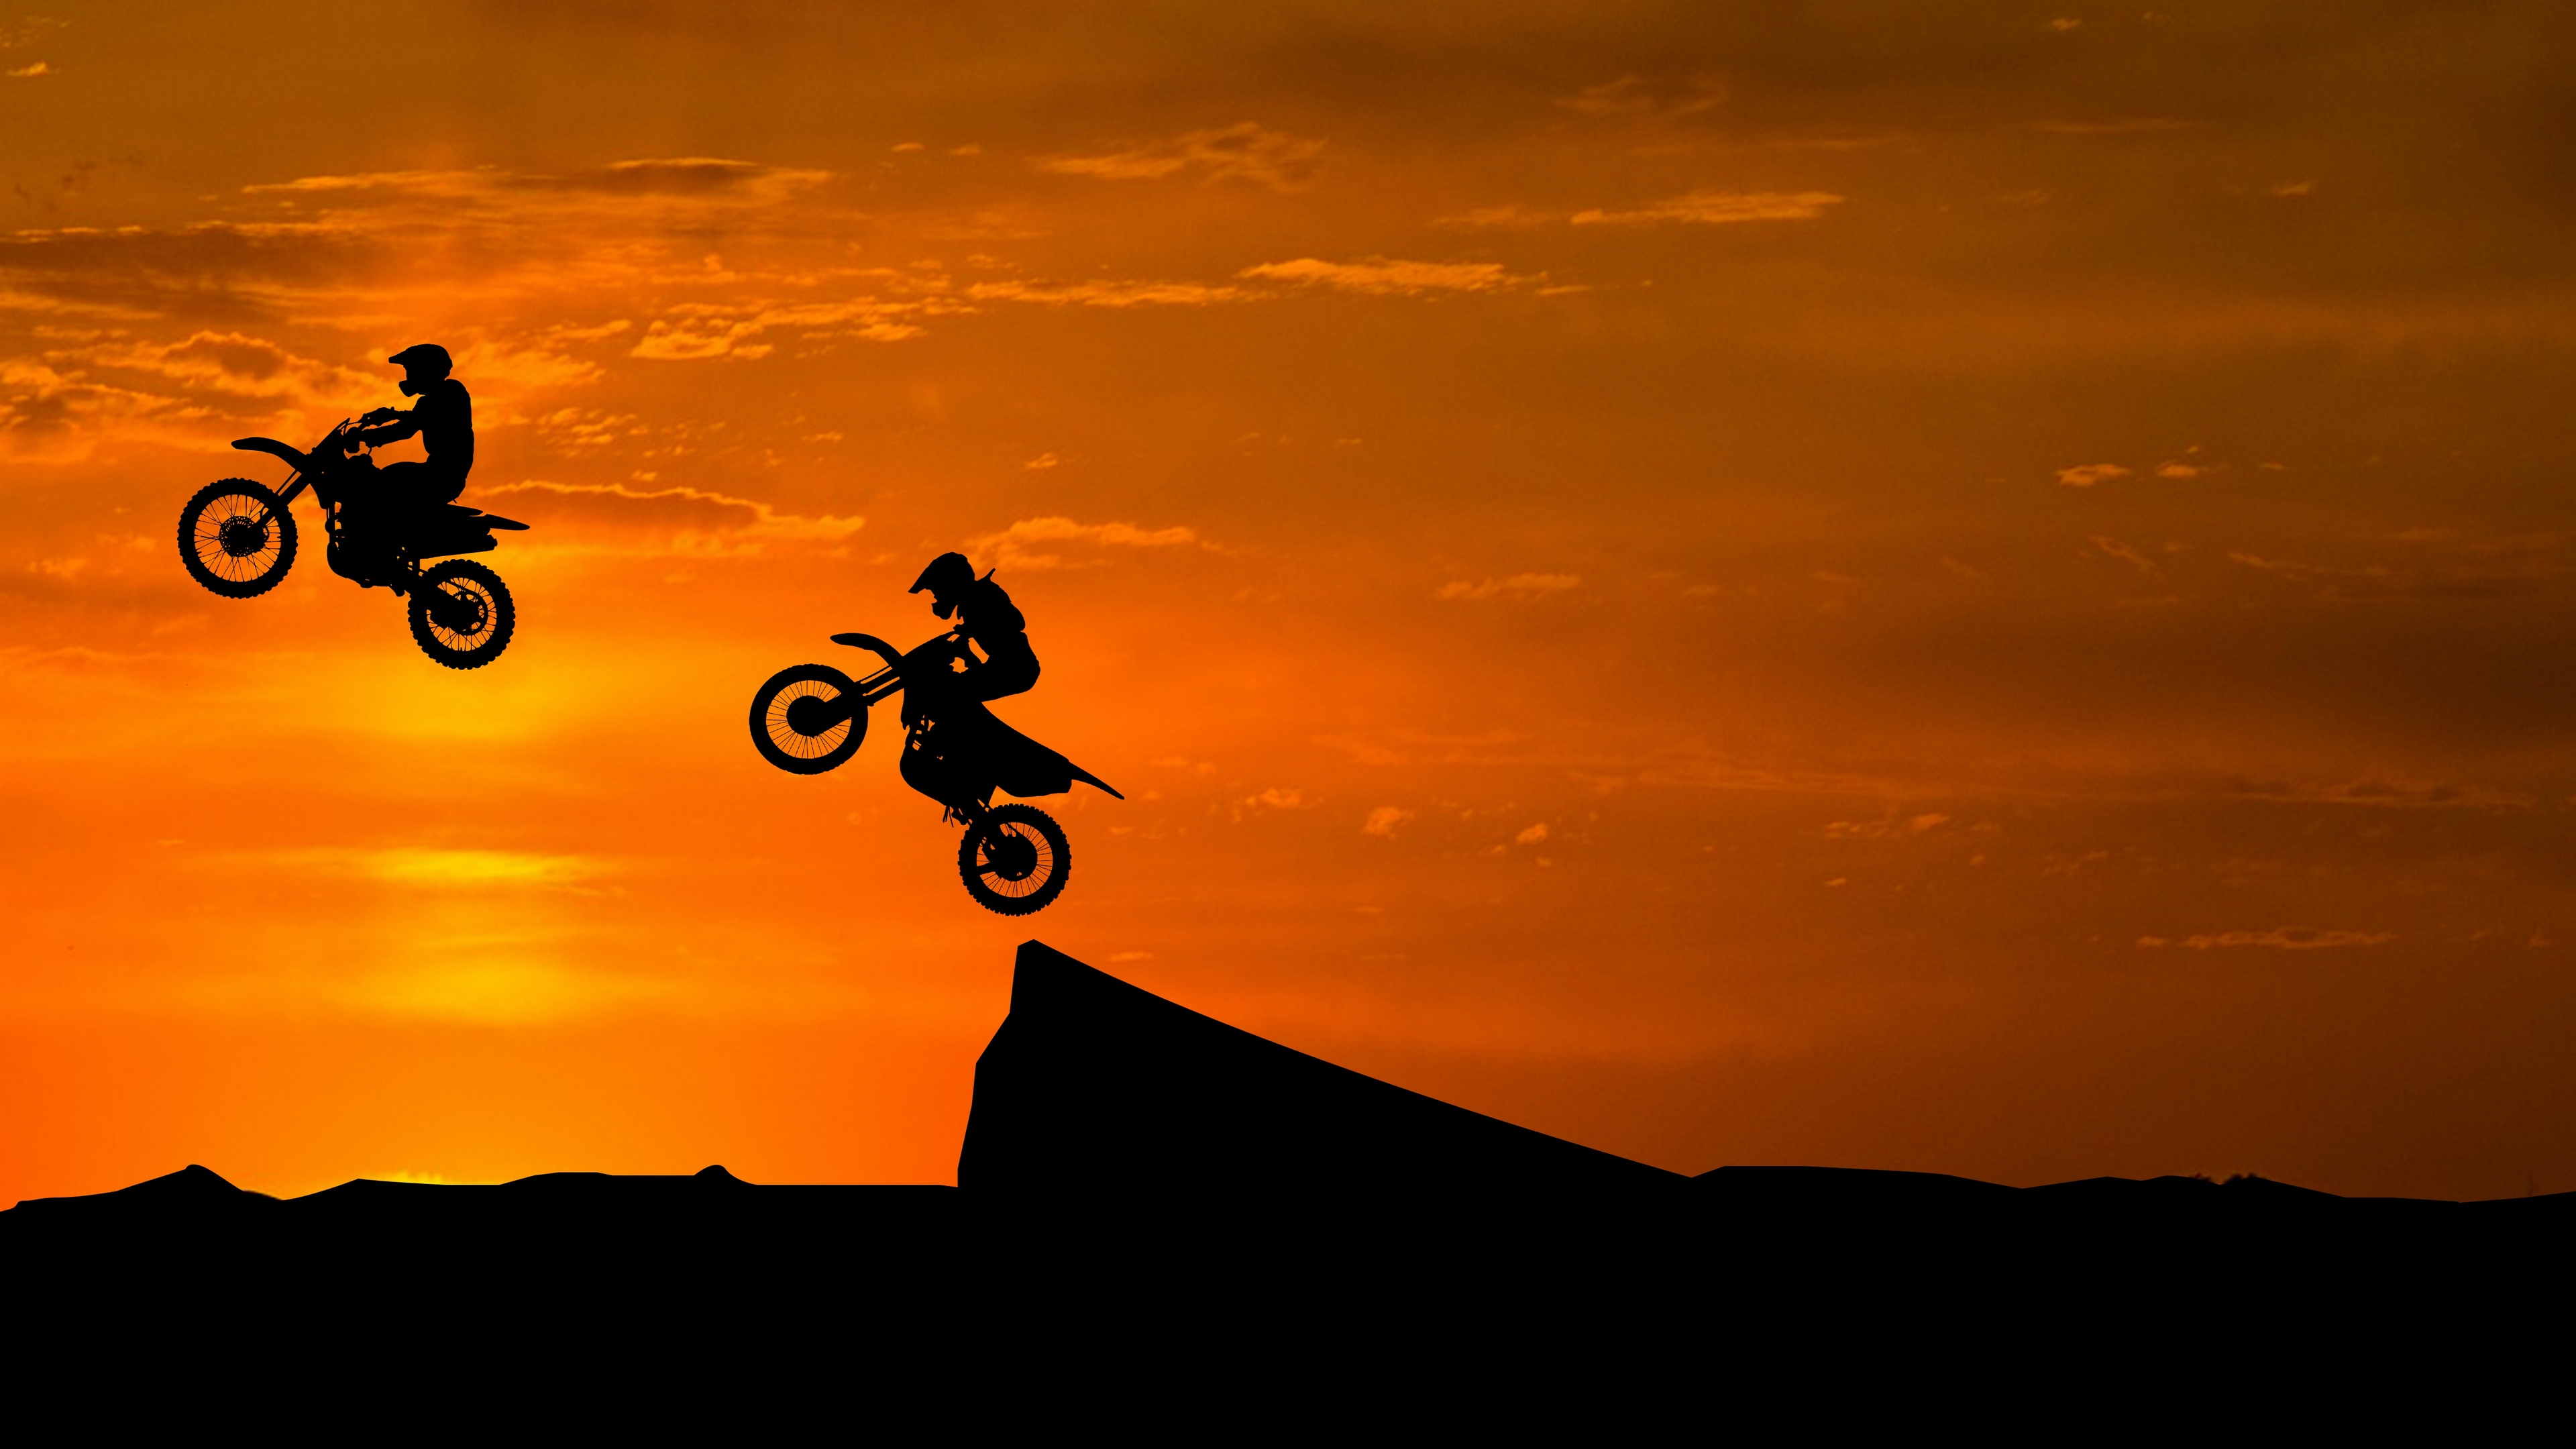 motorcyclist silhouettes trick hill 4k 1536018886 - motorcyclist, silhouettes, trick, hill 4k - trick, silhouettes, motorcyclist